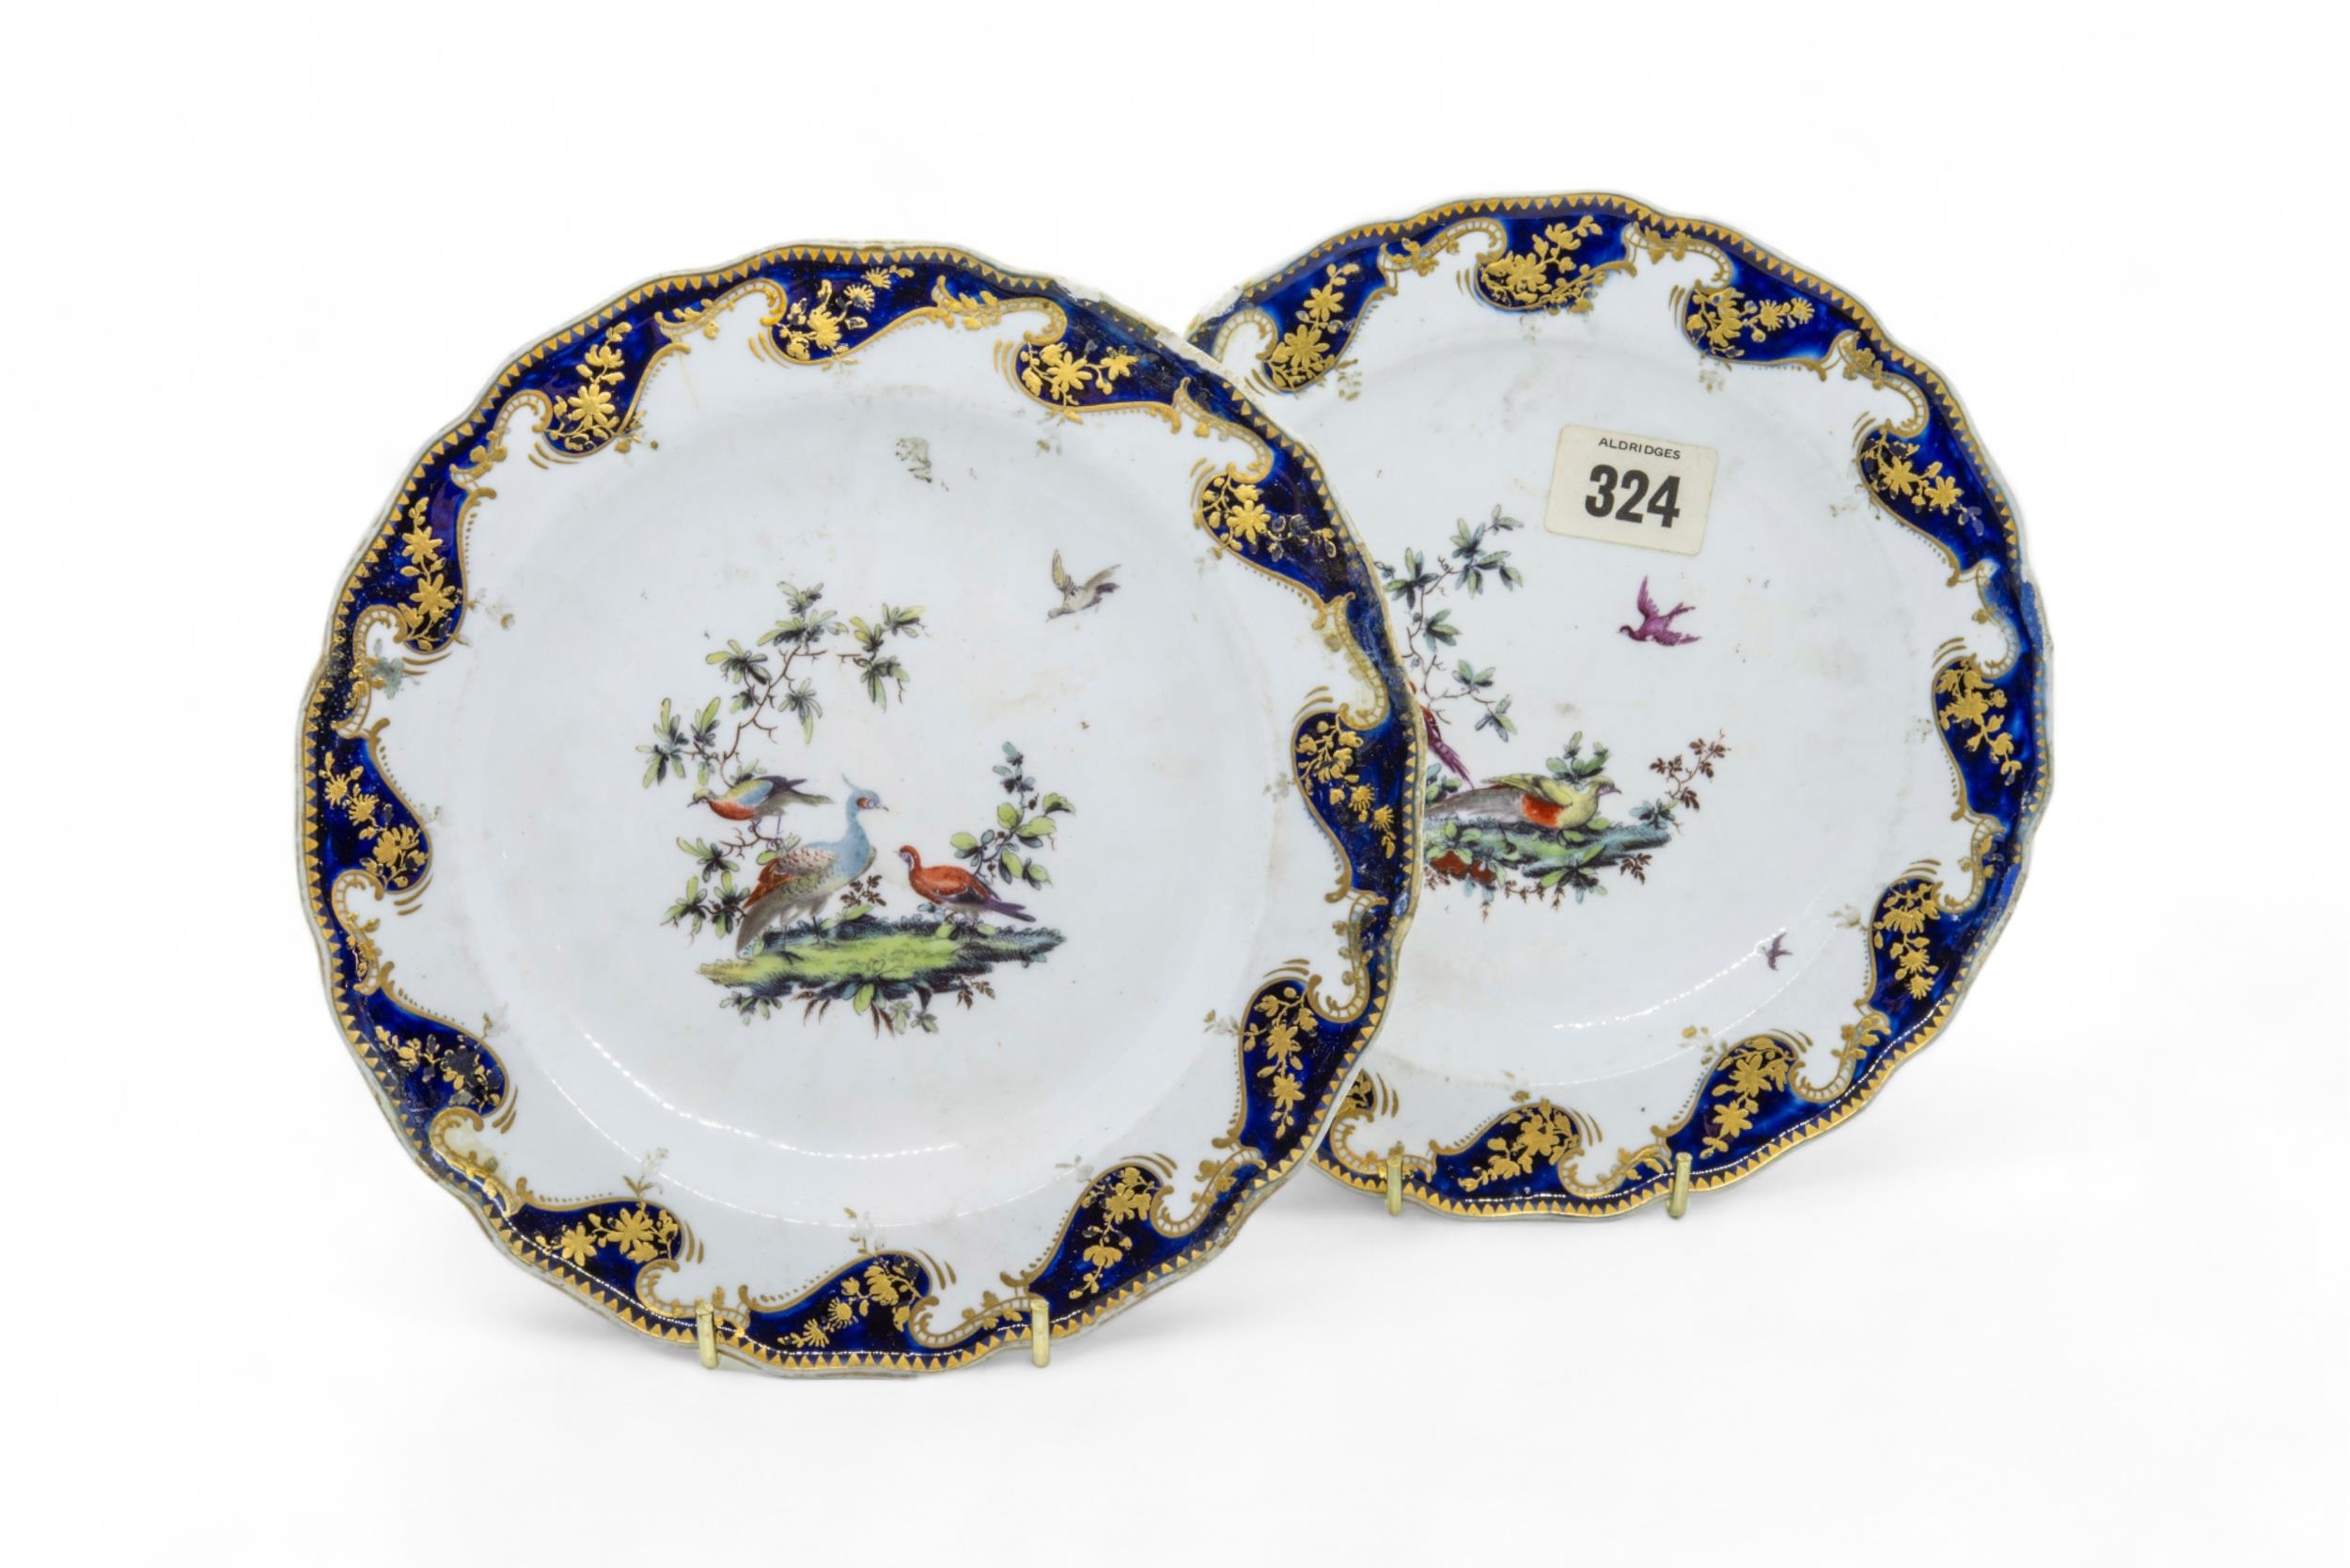 A CHELSEA RED ANCHOR DISH,  Circa 1755, together with two gold anchor plates, another plate and a - Image 2 of 5